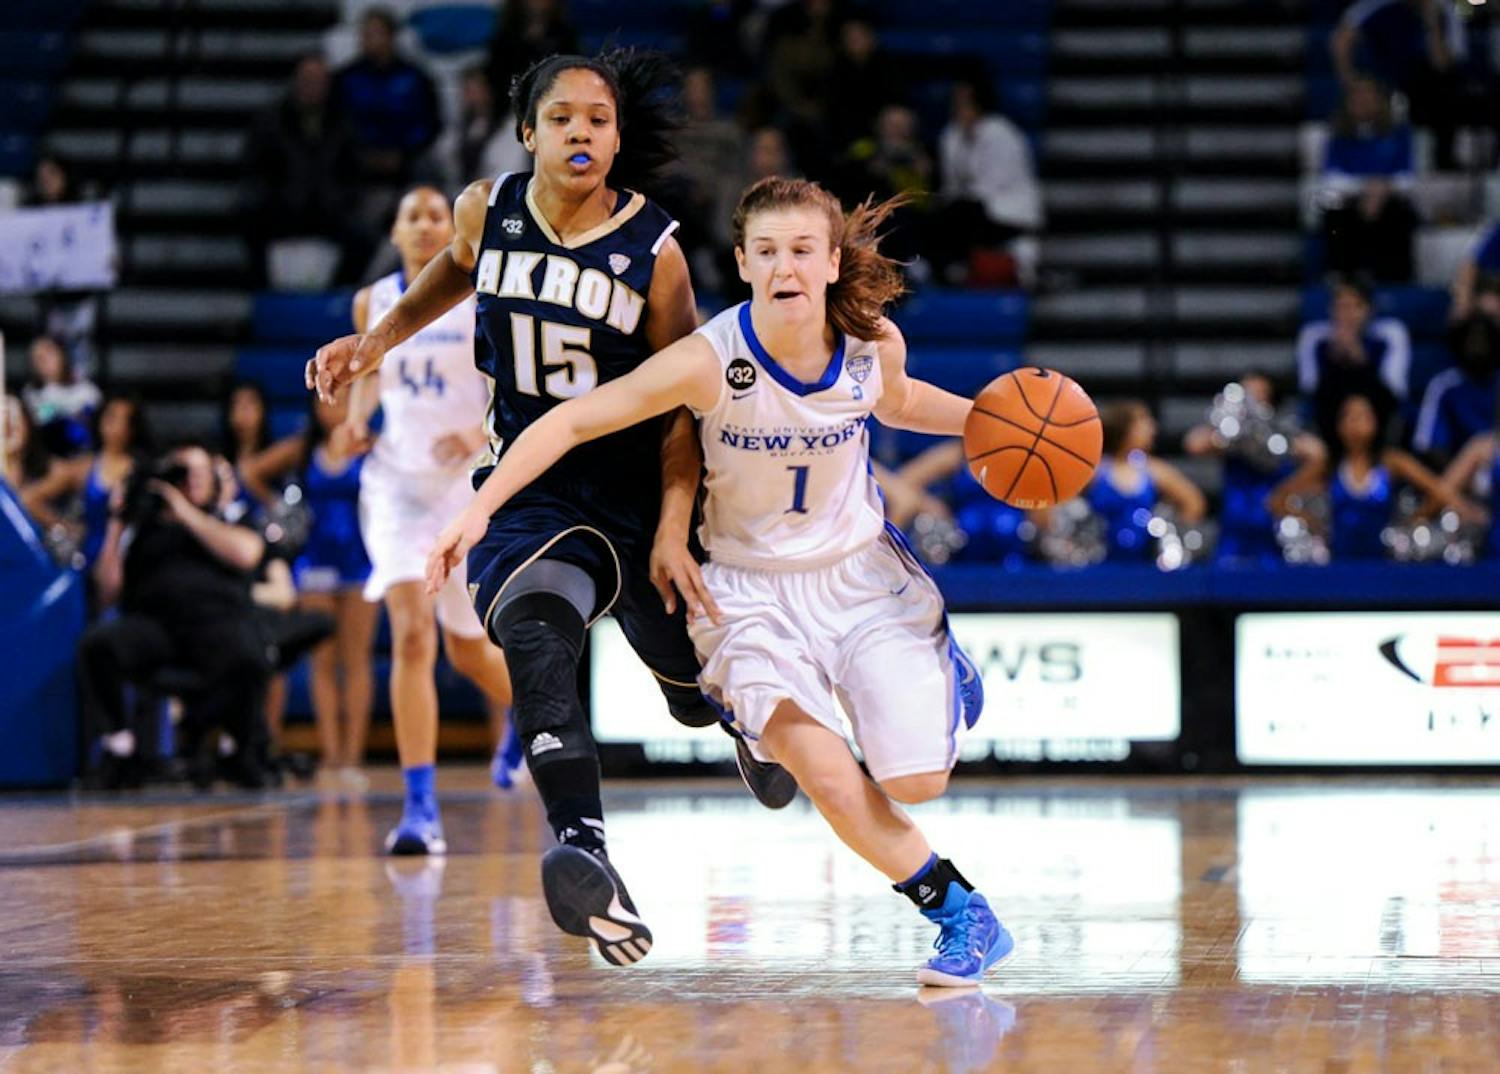 UB's Stephanie Reid drives to the basket against an Akron defender. Reid finished with 21 points and four assists in the Bulls’ 16th win of the season.